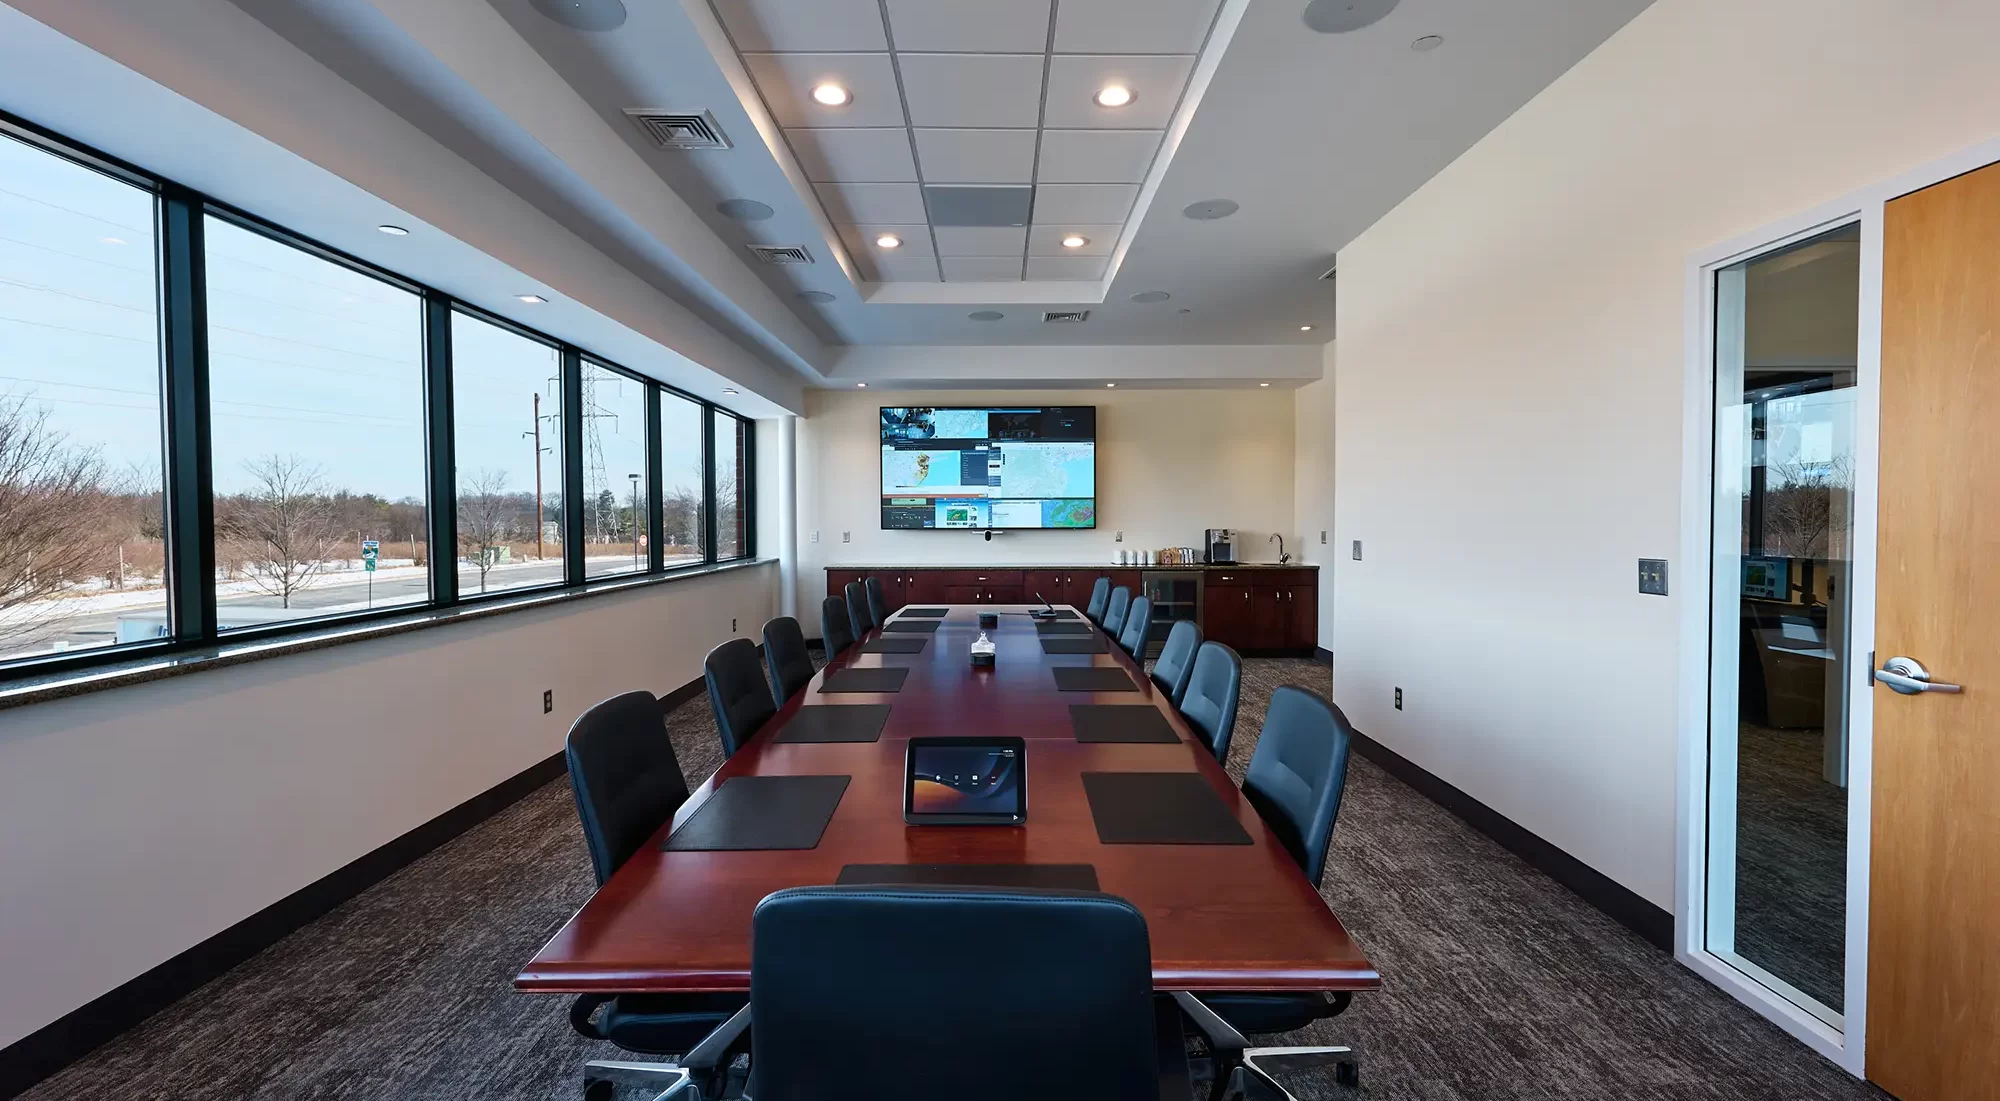 A conference room with a television and control panel.